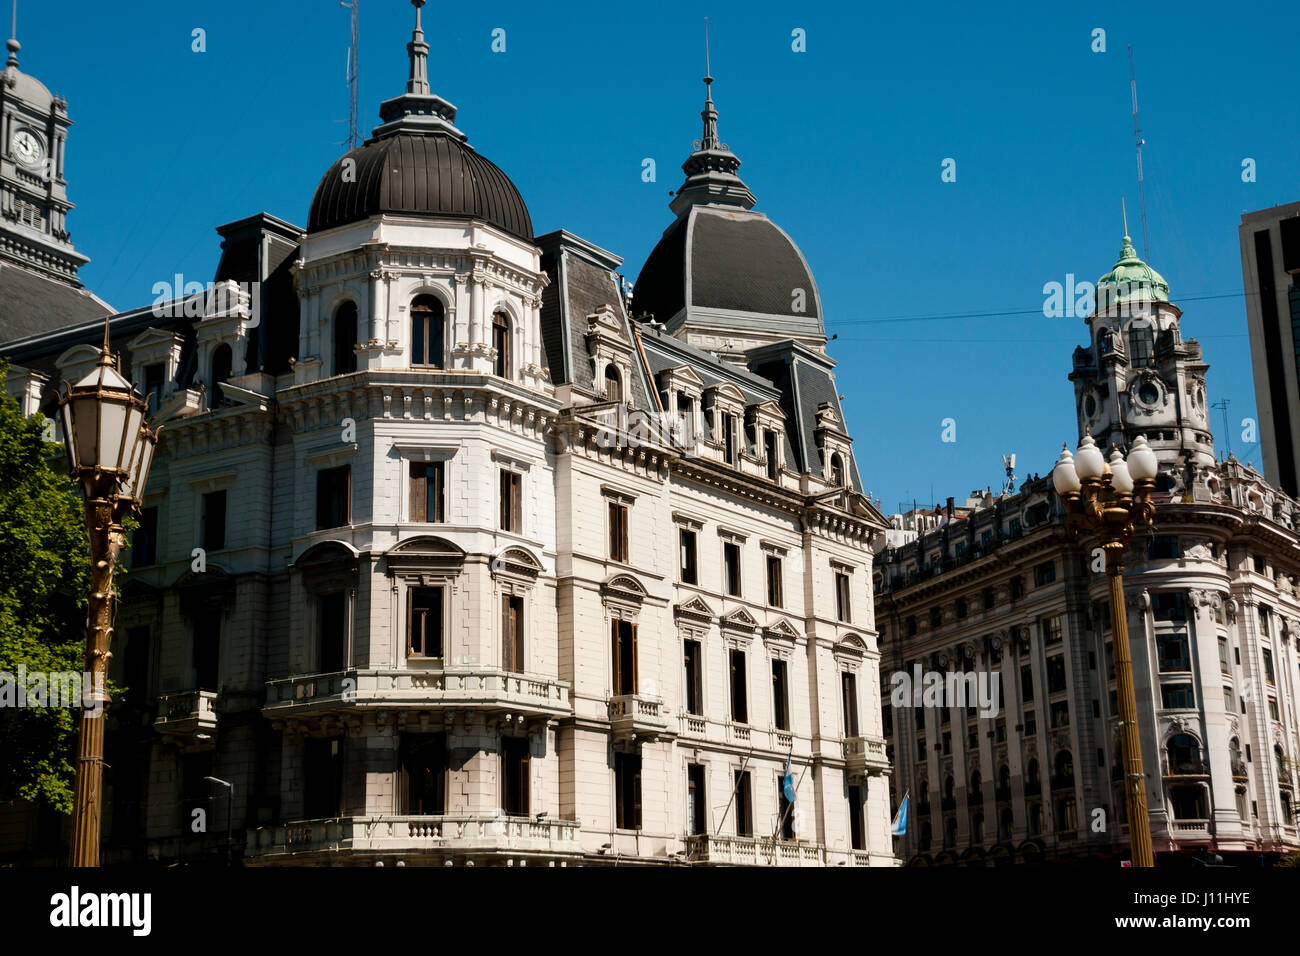 City Buildings - Buenos Aires - Argentina Stock Photo